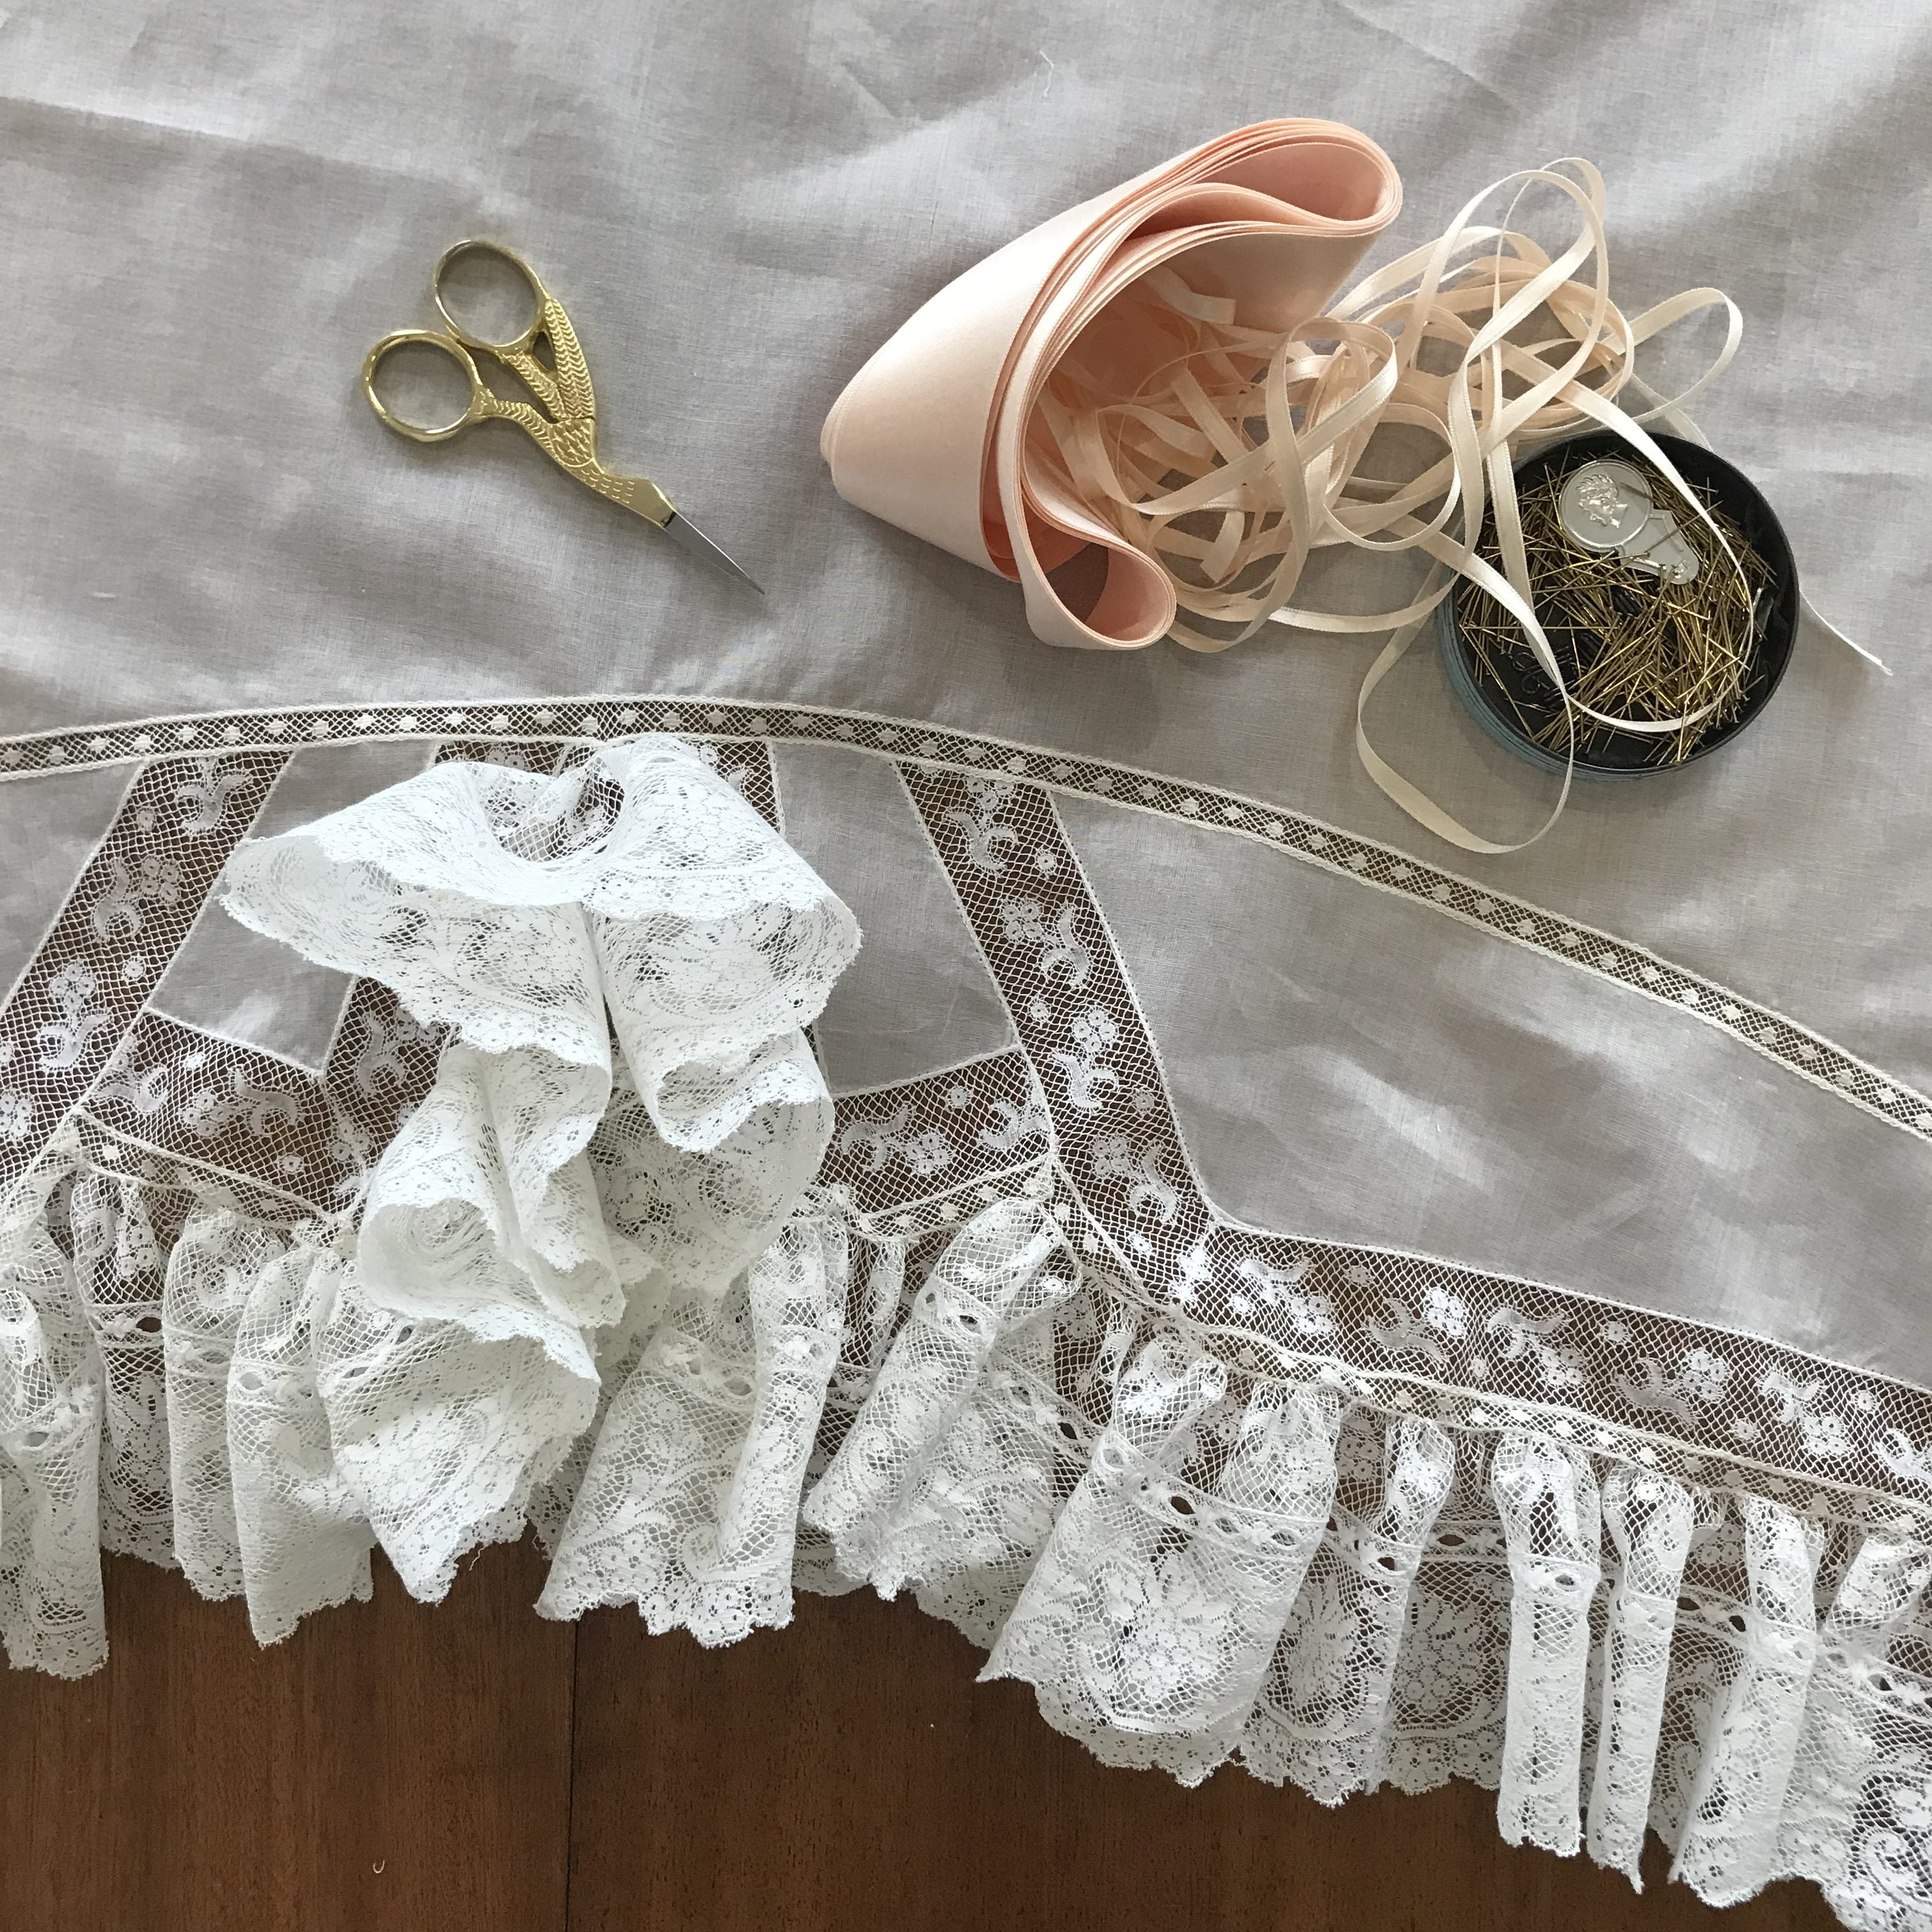 How to master insertion lace in pictures - Cathy Hay